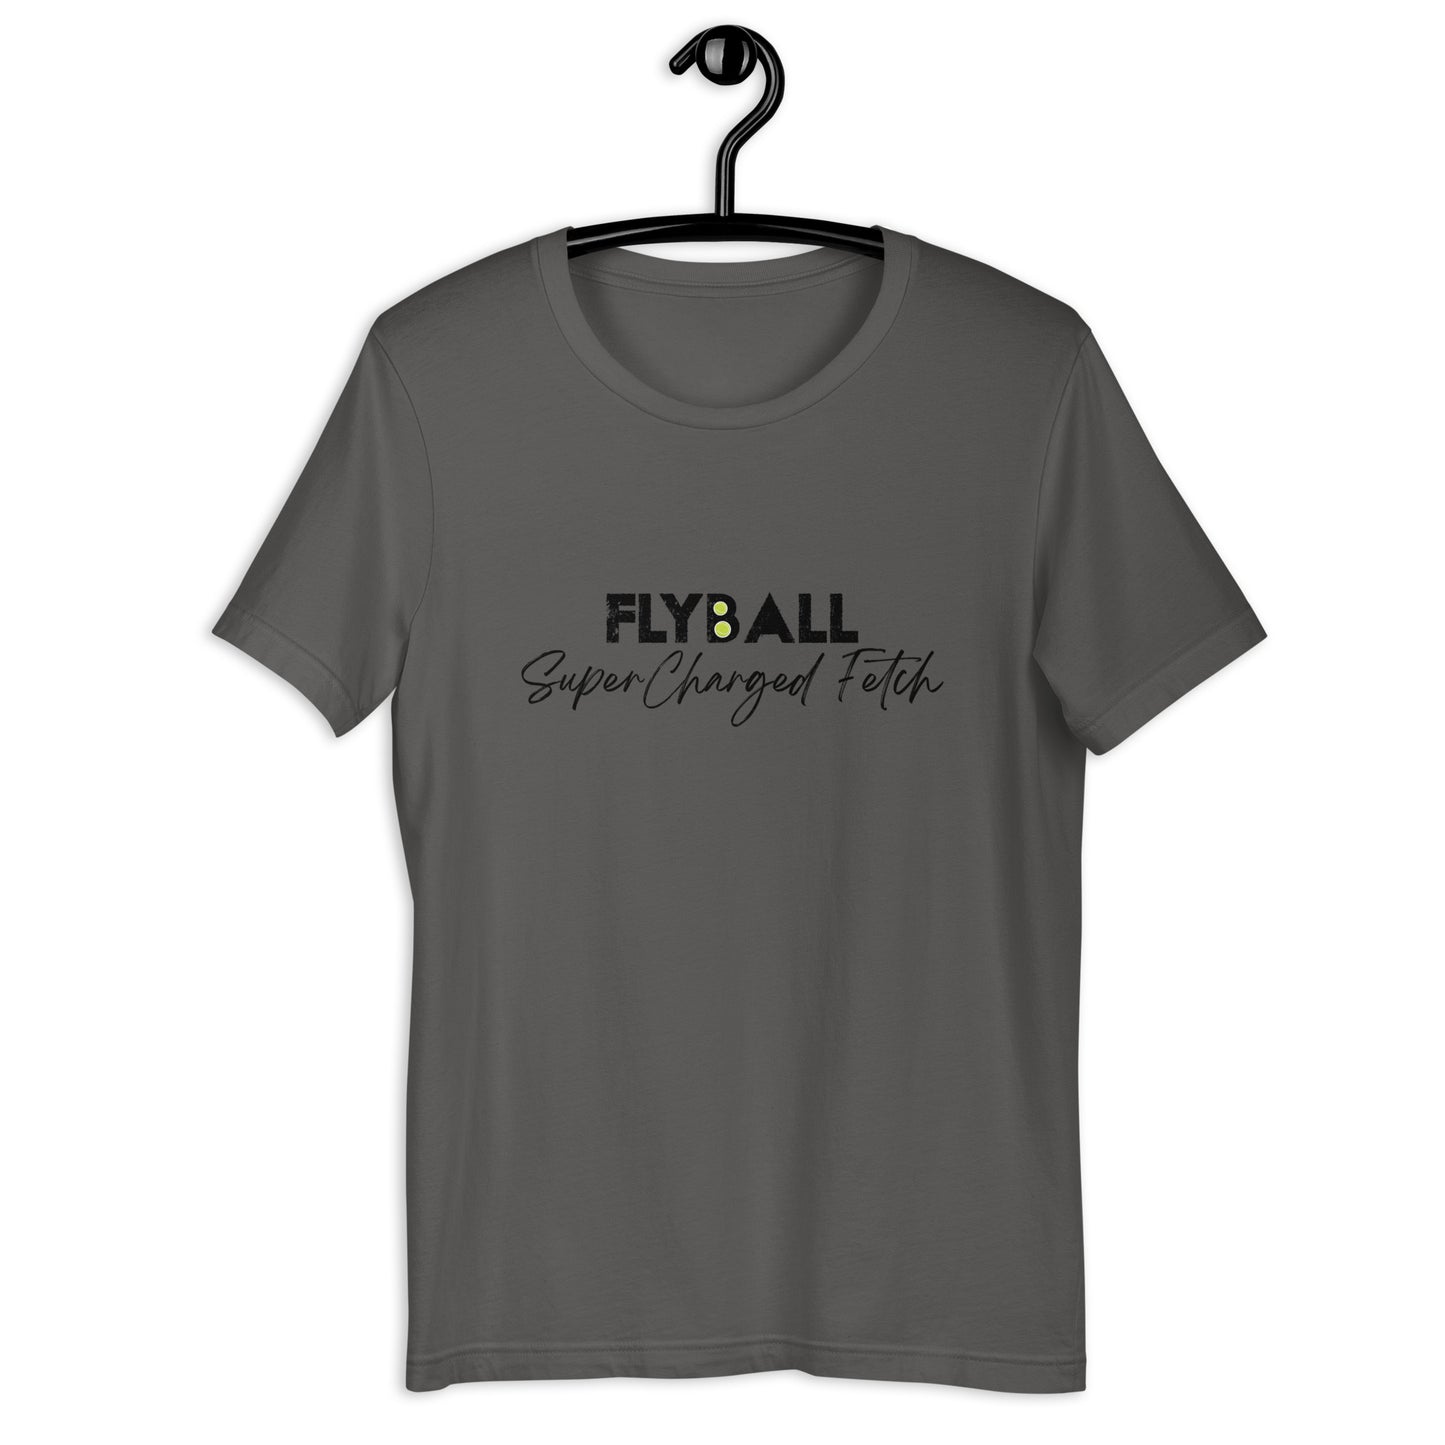 FLYBALL - Supercharged Fetch - Unisex t-shirt